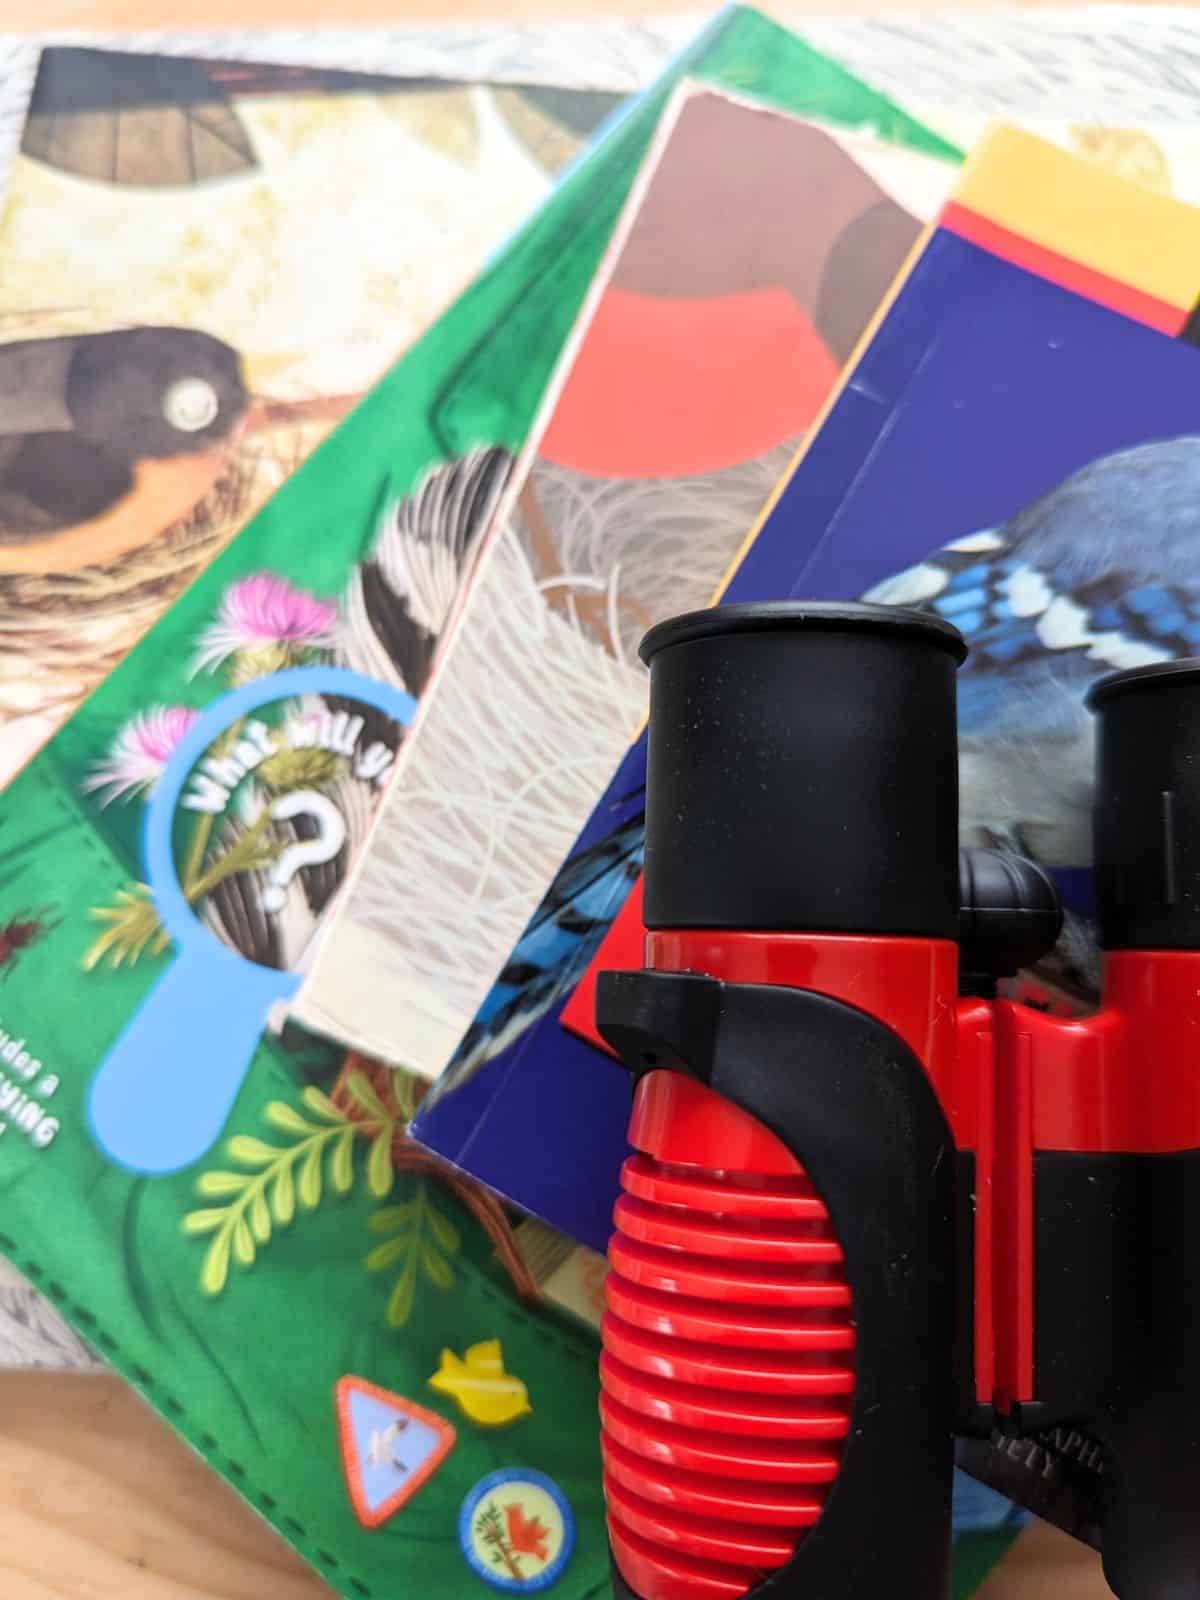 collection of children's books about birds fanned out on a table with red and black binoculars on top.